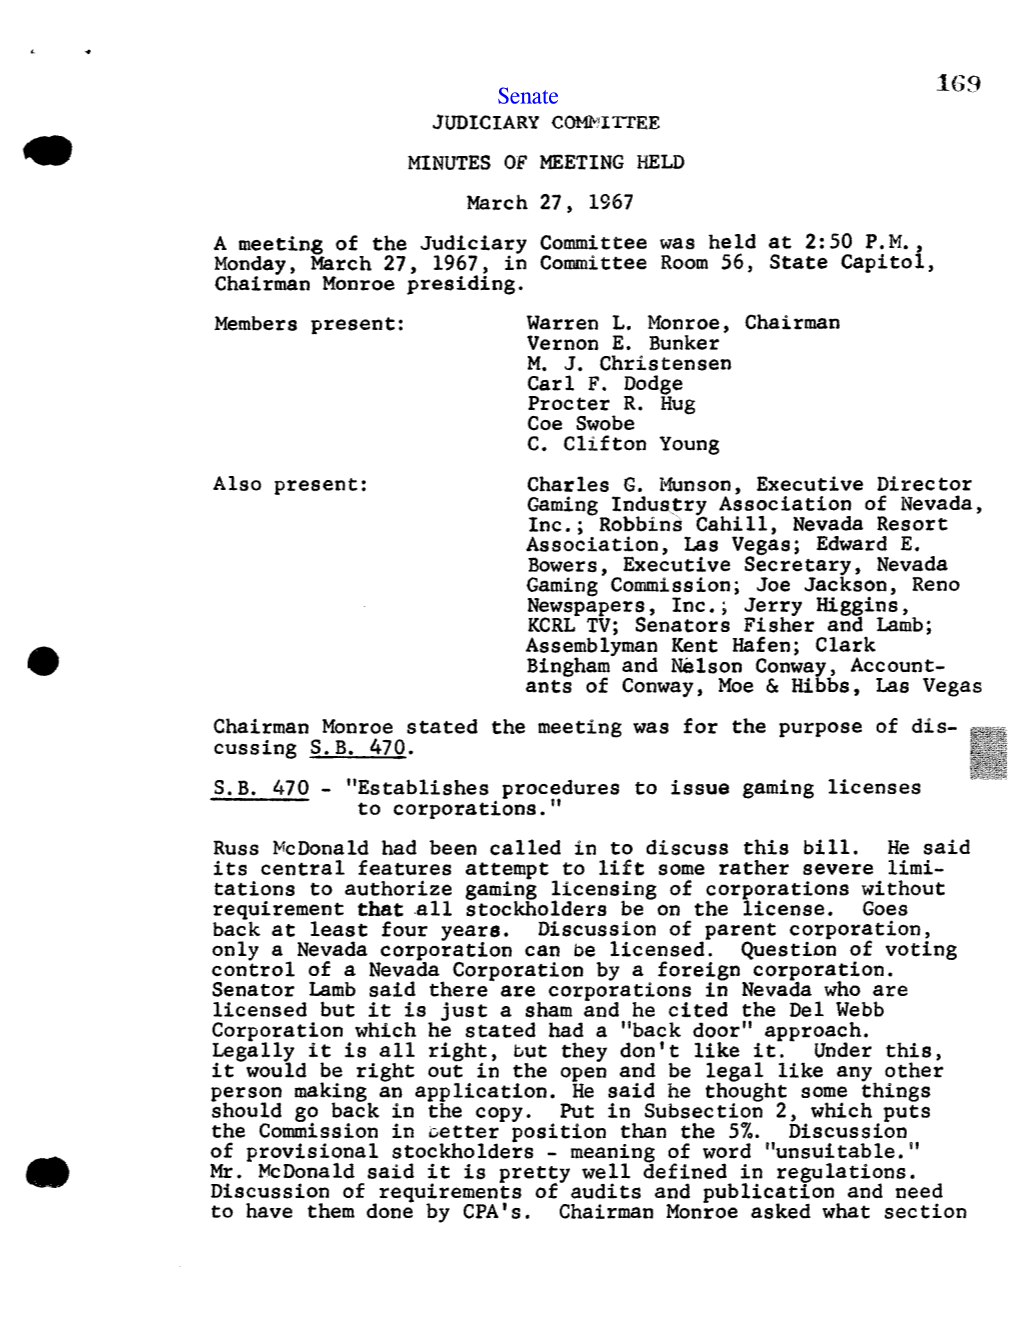 Minutes of the Senate Committee on Judiciary, 3-27-1967